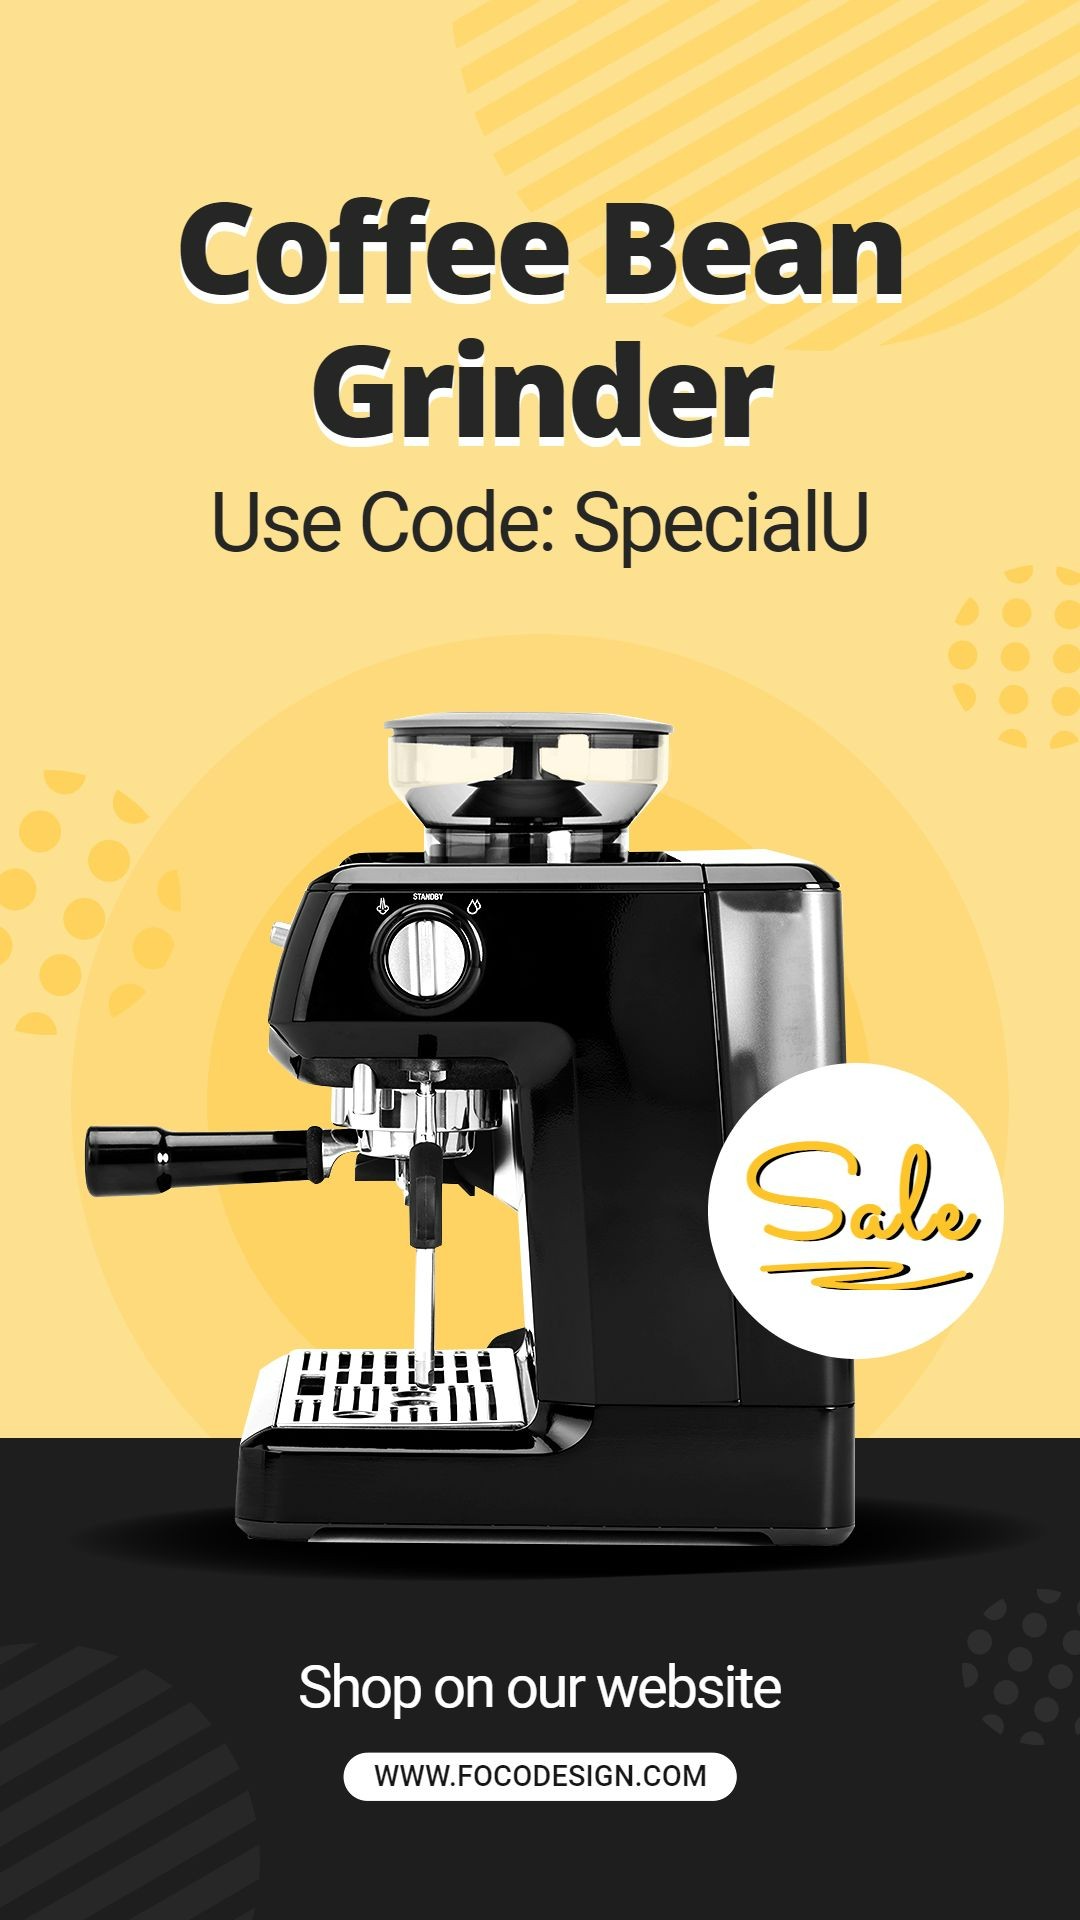 Coffee Bean Grinder Home Electronic Appliance Kitchenware Sale Promo Ecommerce Story预览效果